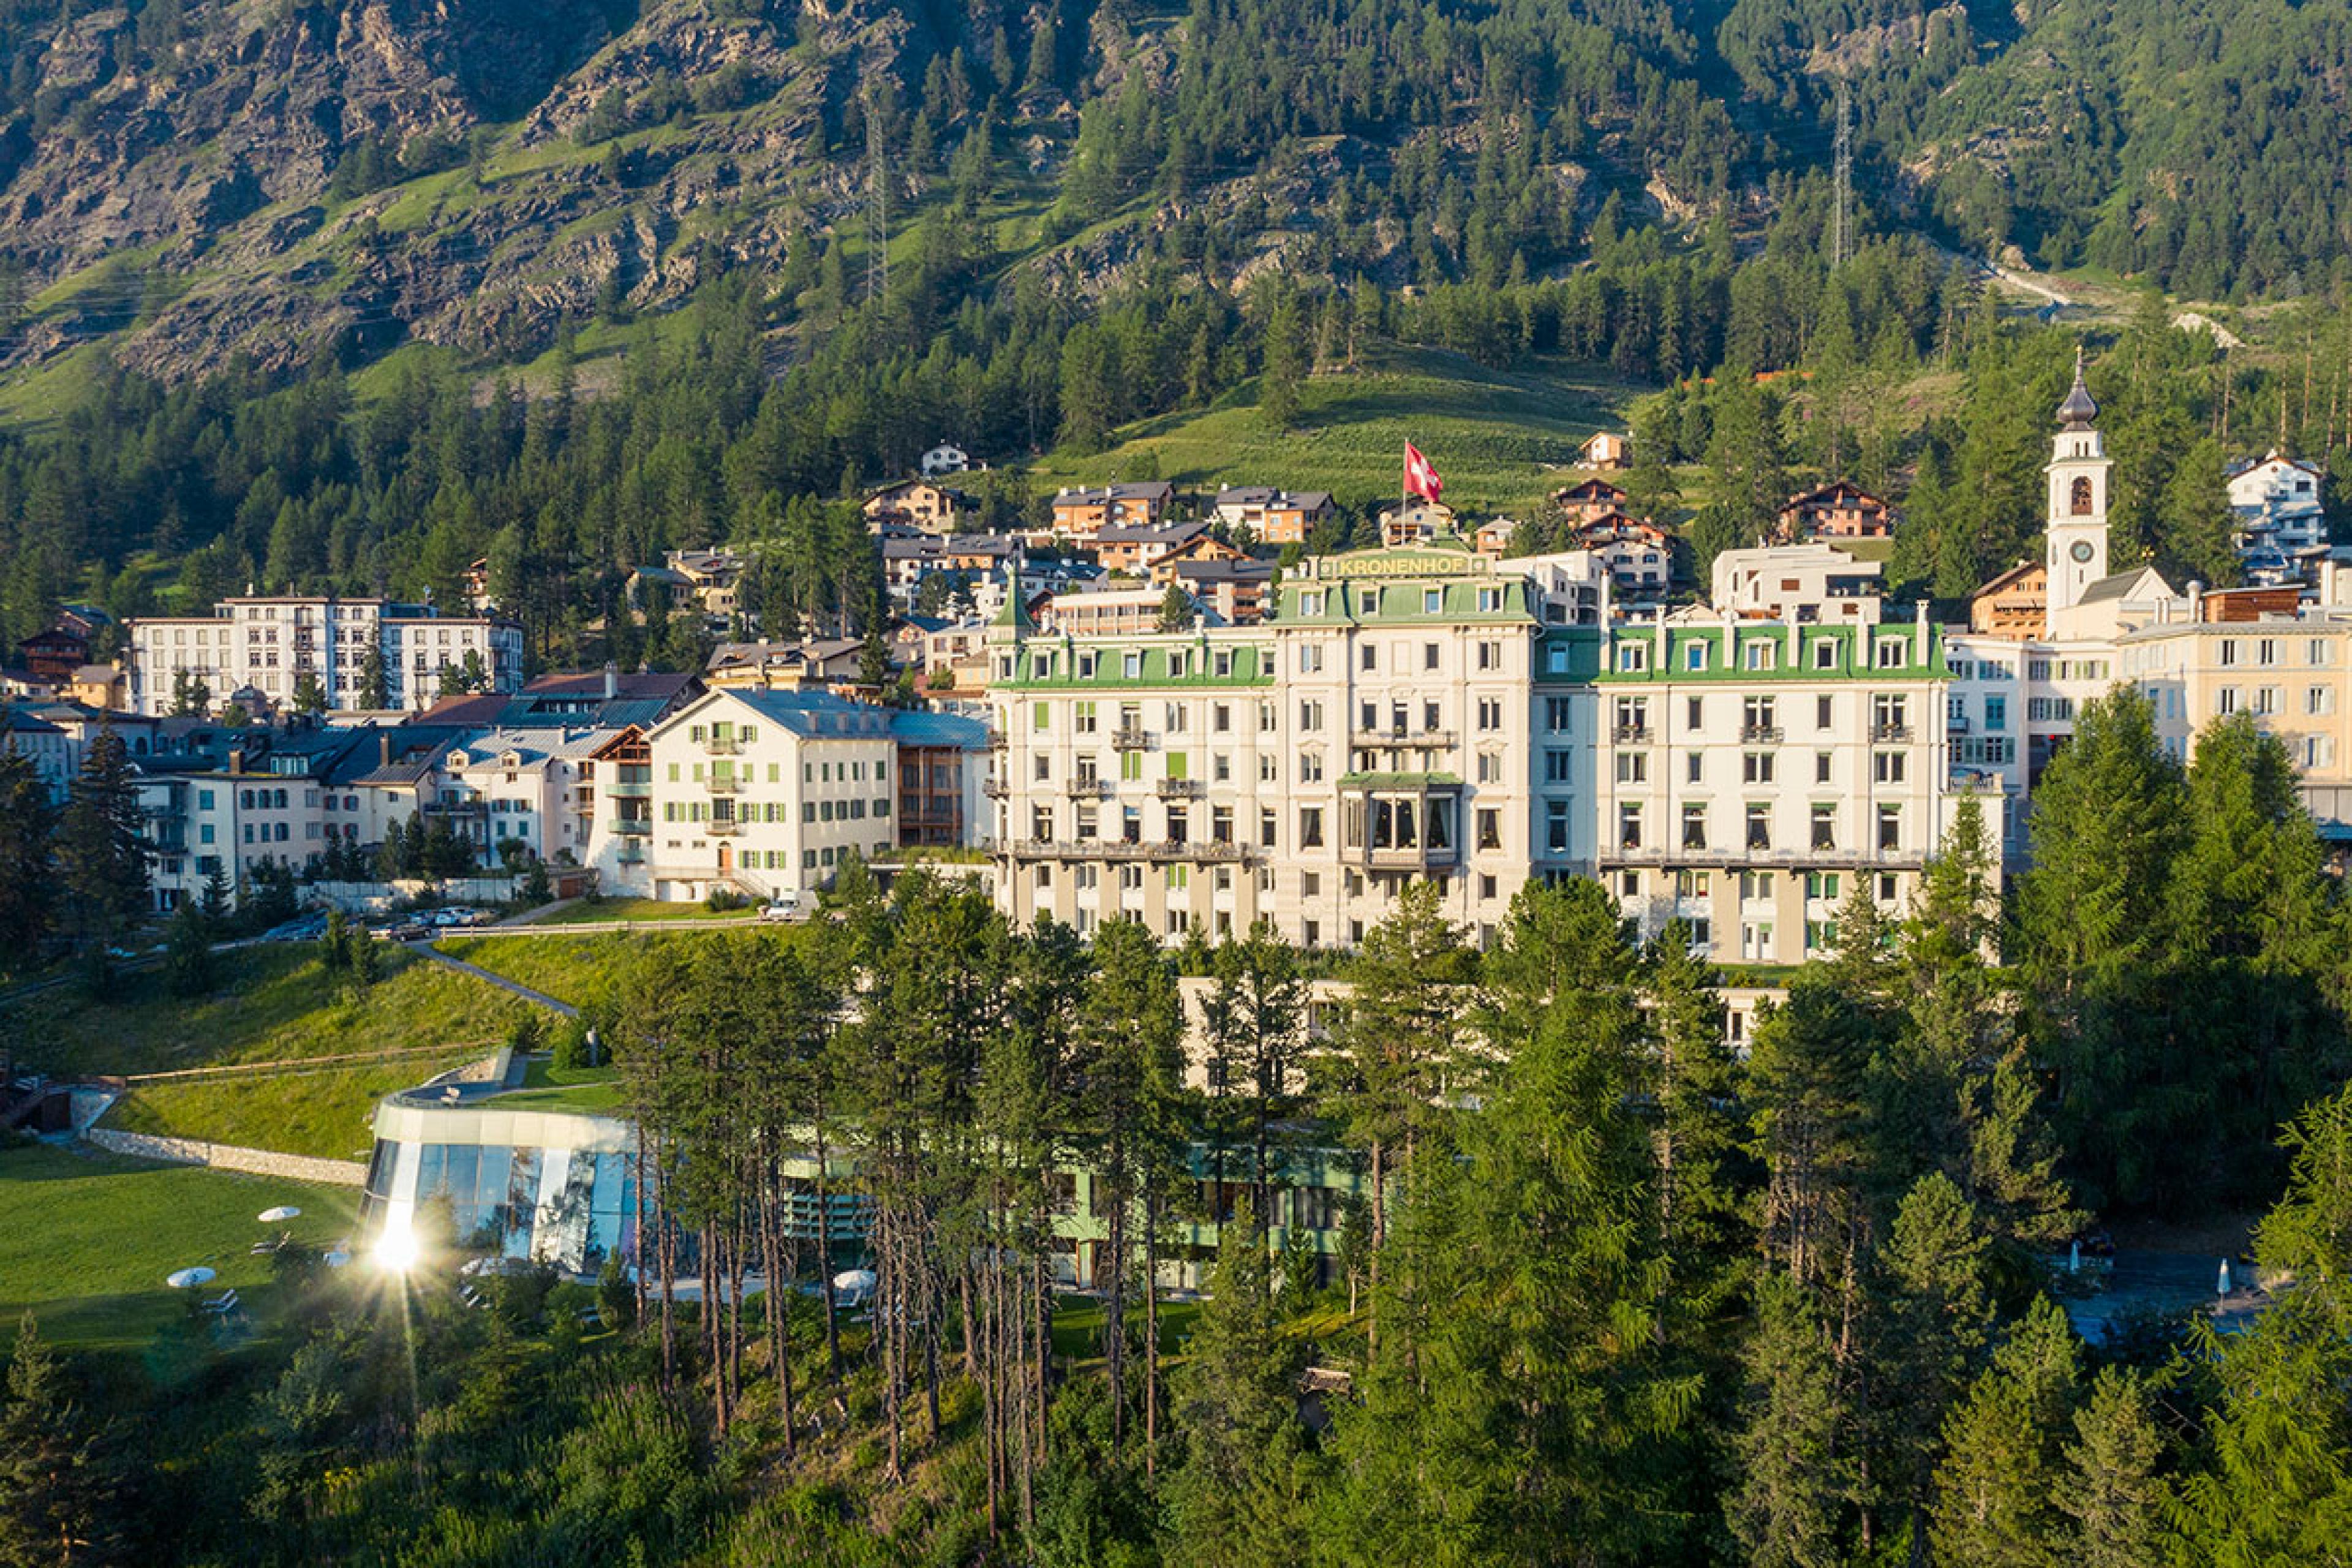 exterior of historic swiss hotel in summertime with green roof and white walls with mountain in background and trees in foreground